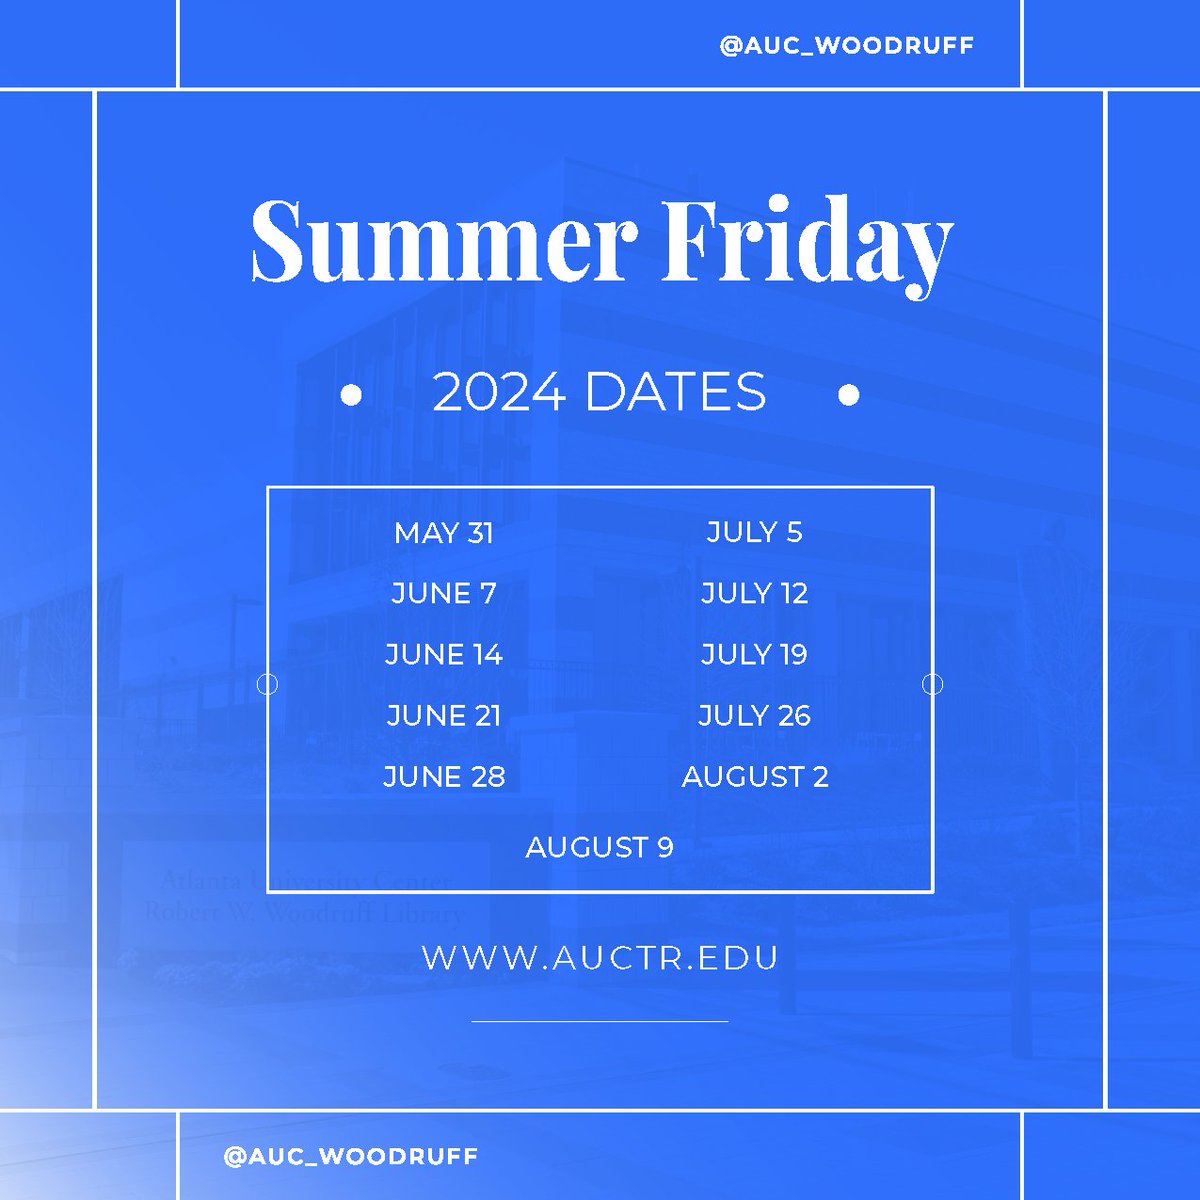 Attention Library Users!📢🚨 “Summer Fridays” return May 31-Aug 9. The Library building will be closed on Fridays, but virtual services remain available. Visit us during regular hours or use our digital resources: auctr.edu @Morehouse @SpelmanCollege @CAU